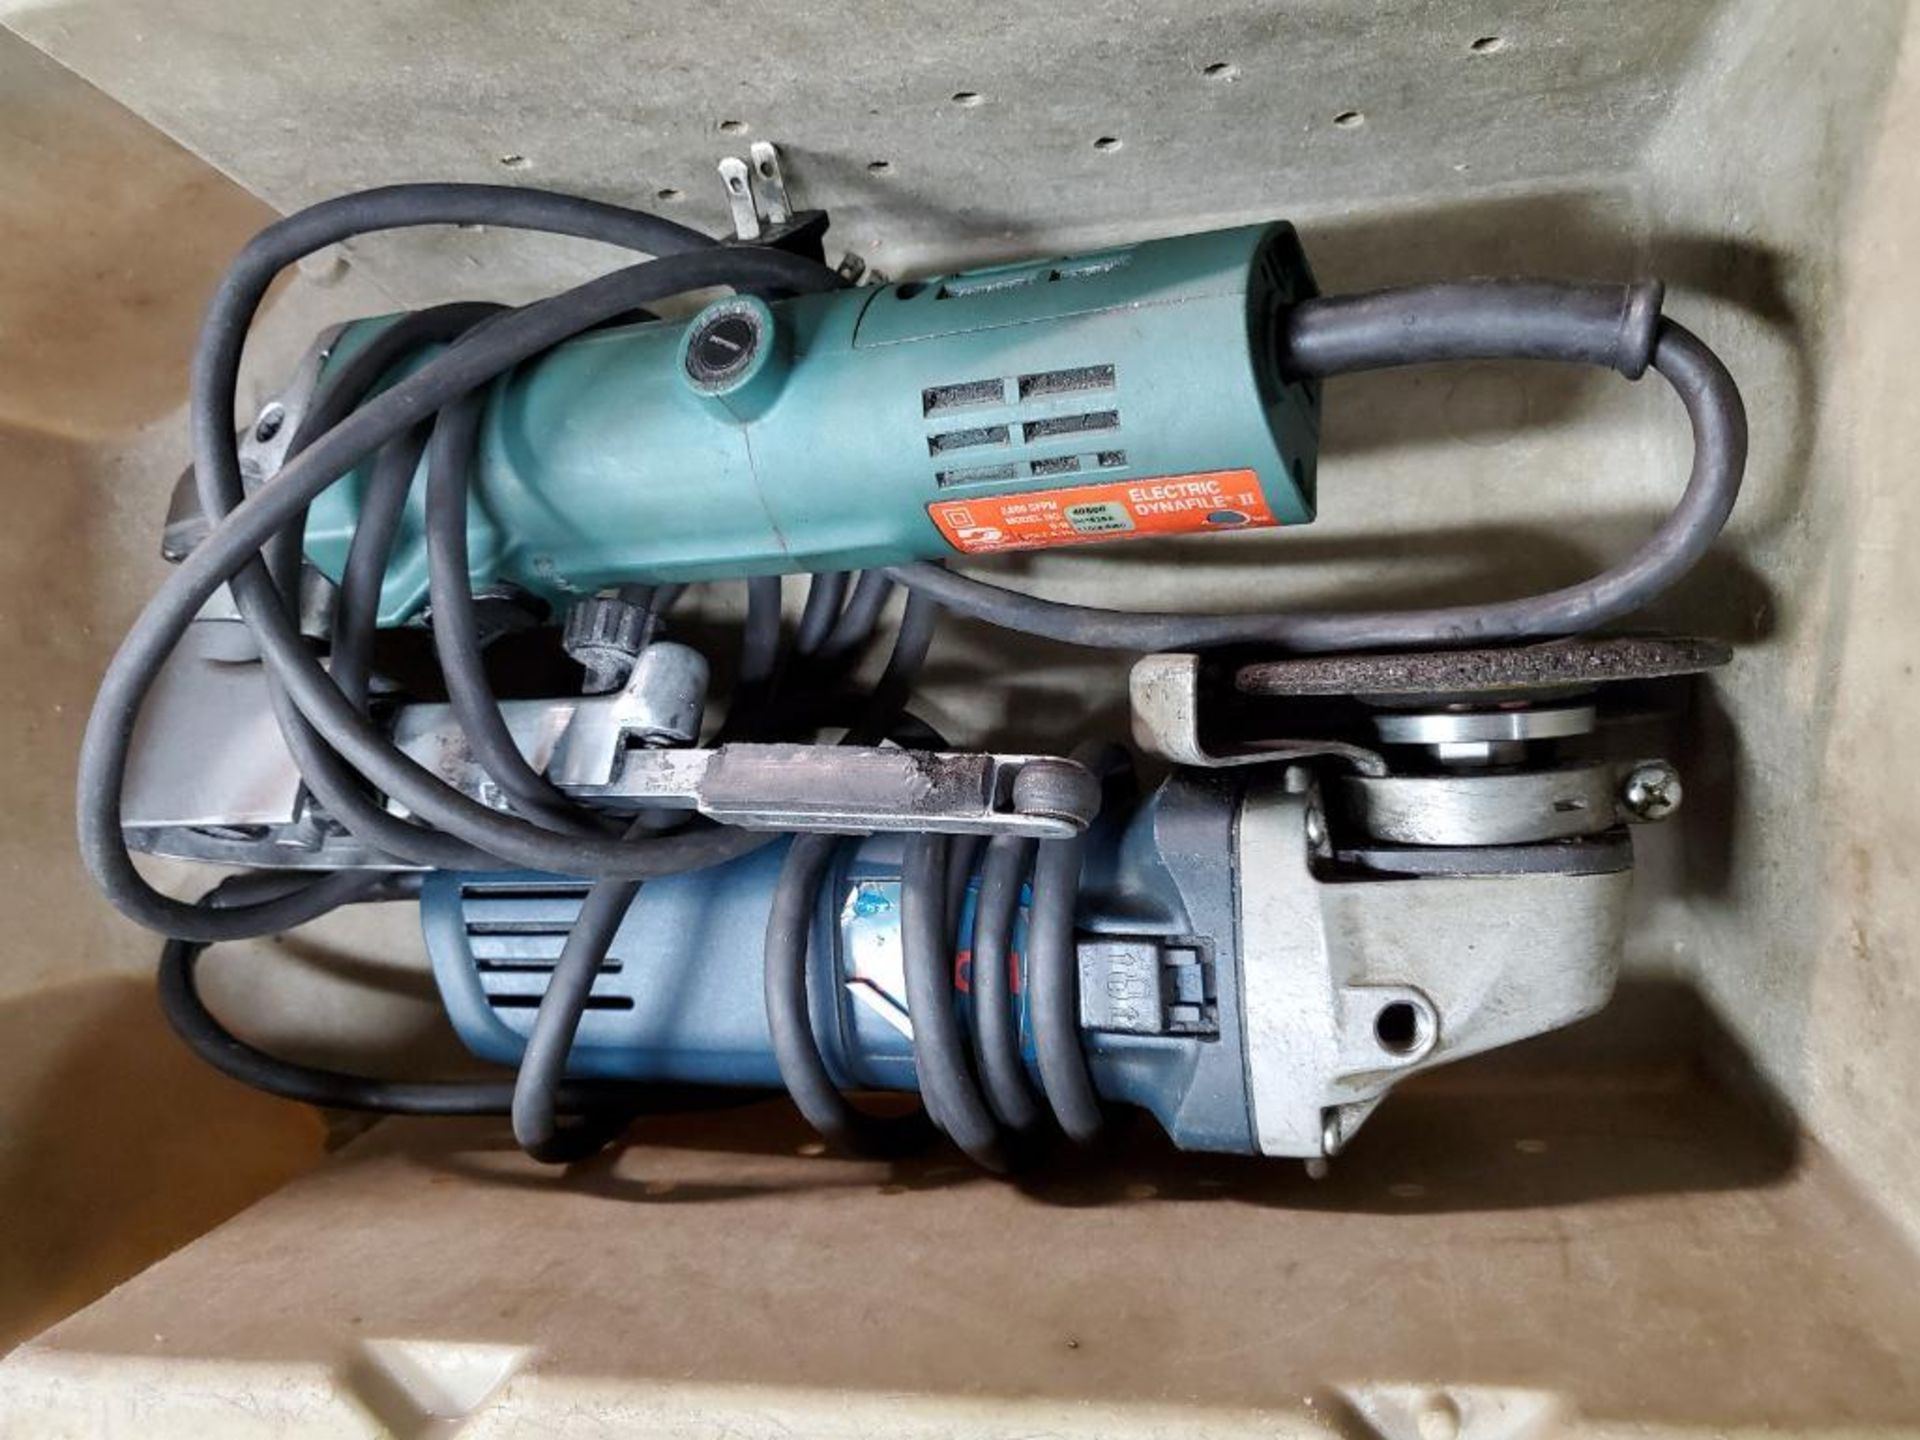 (2) ELECTRIC TOOLS DYNABRADE 11203 1'' SANDER & BOSCH RIGHT ANGLE GRINDER